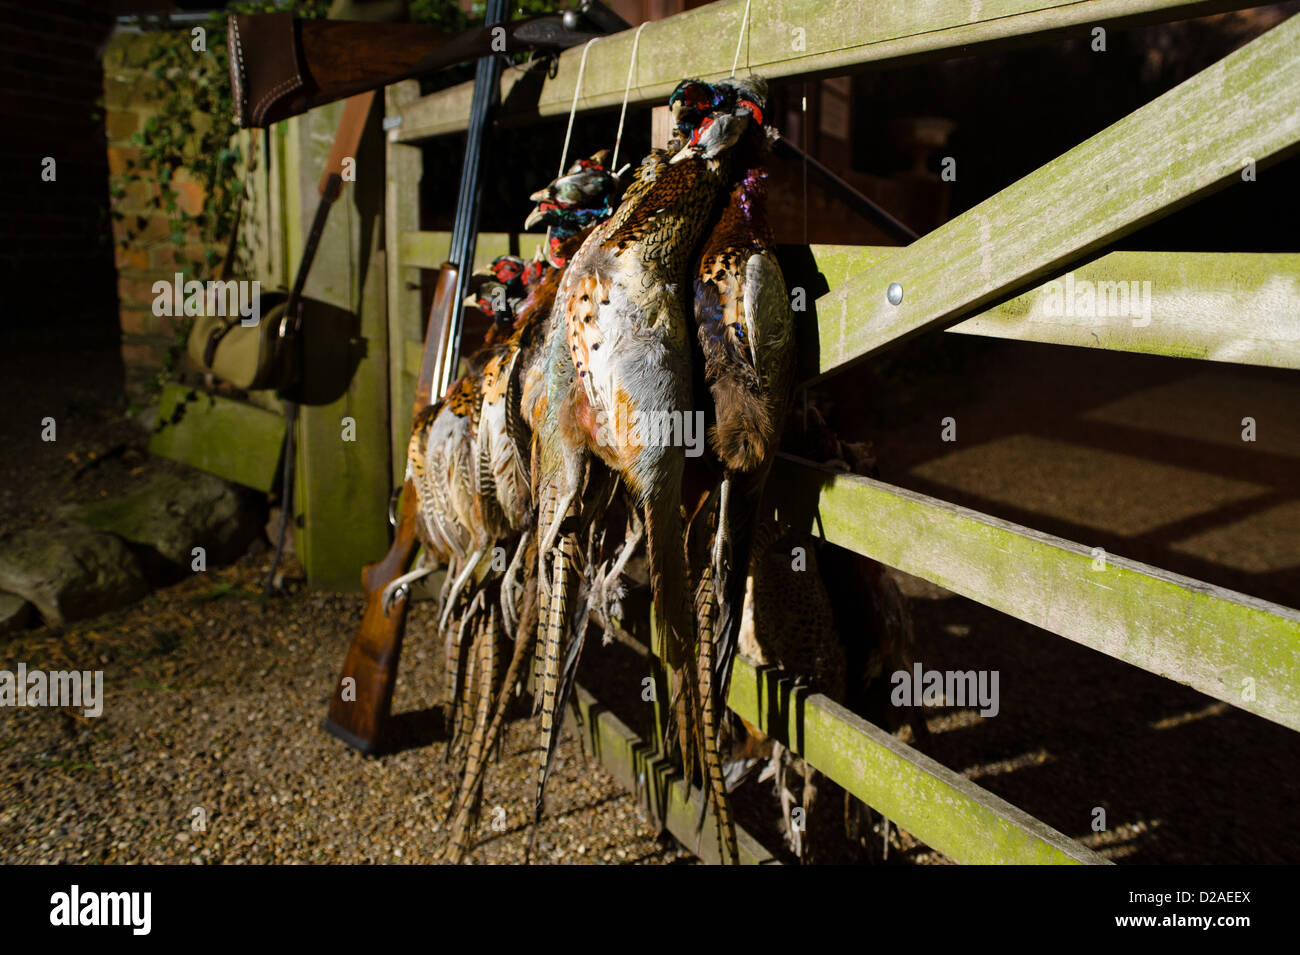 Pheasant Shooting, carcasses hanging on wooden gate. Stock Photo